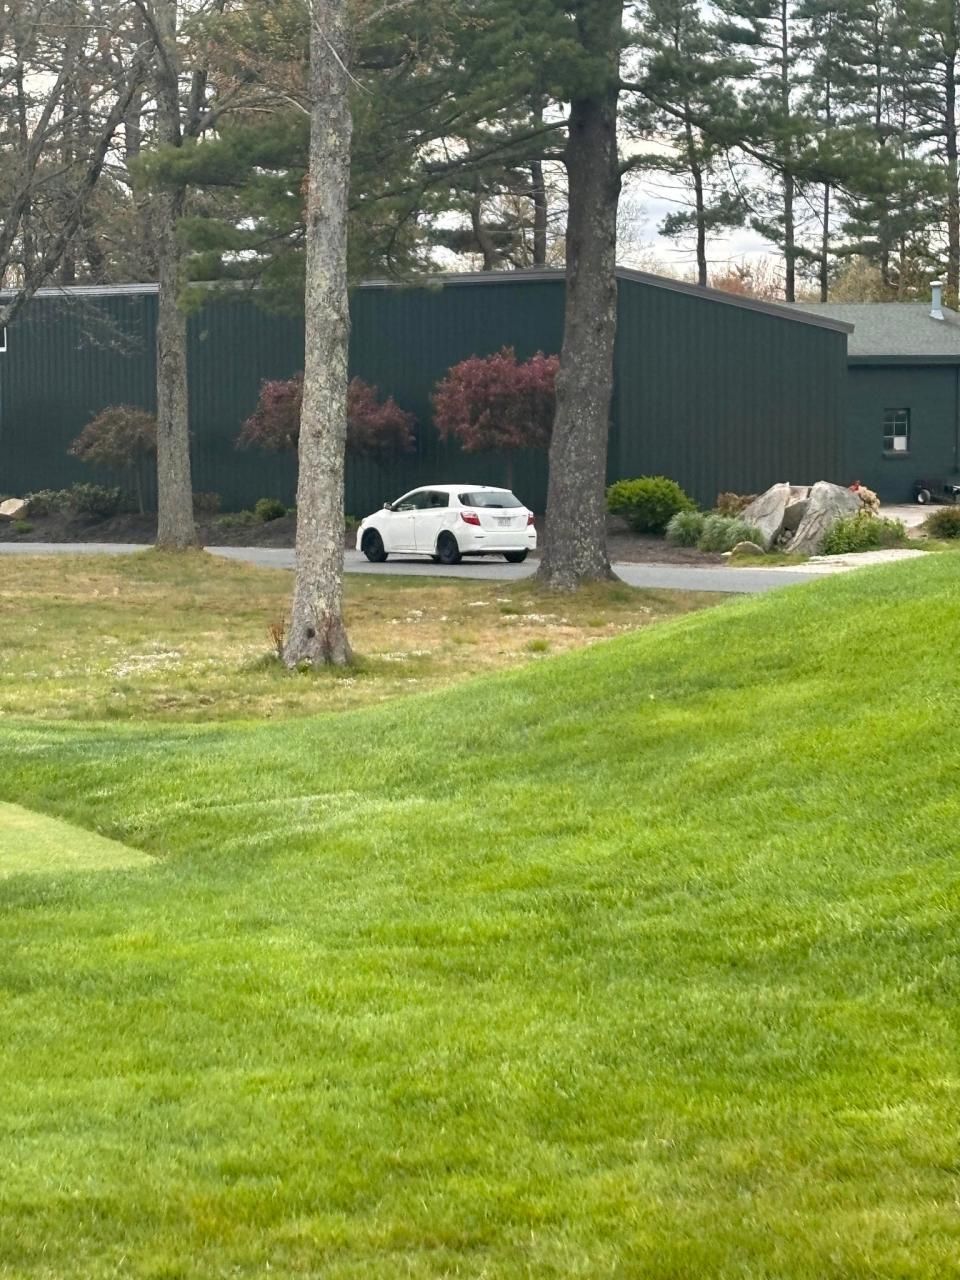 Hopkinton police say this car drove onto the golf course at the Hopkinton Country Club last Saturday.